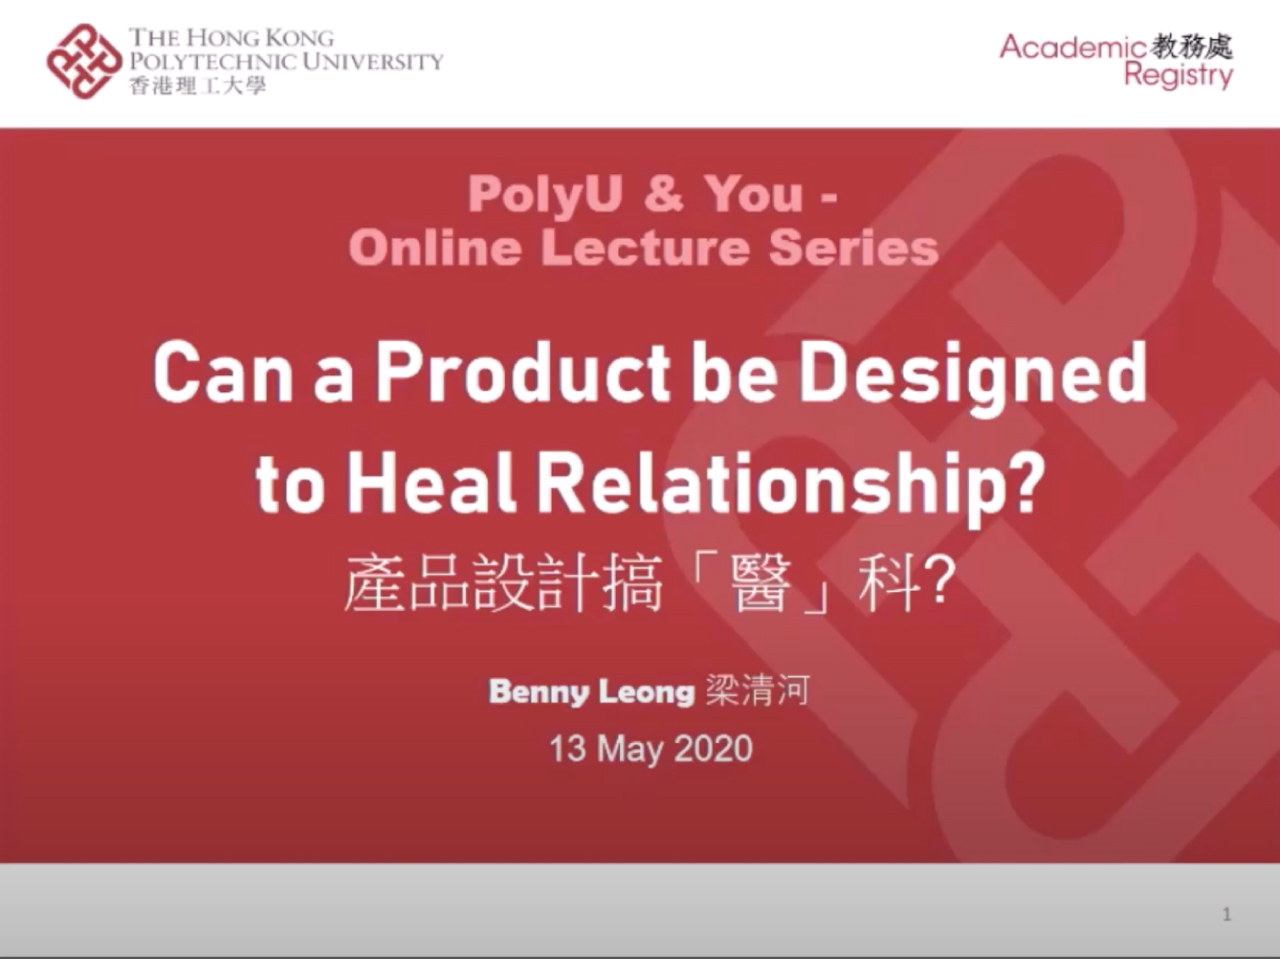 Can a Product be Designed to Heal Relationship?